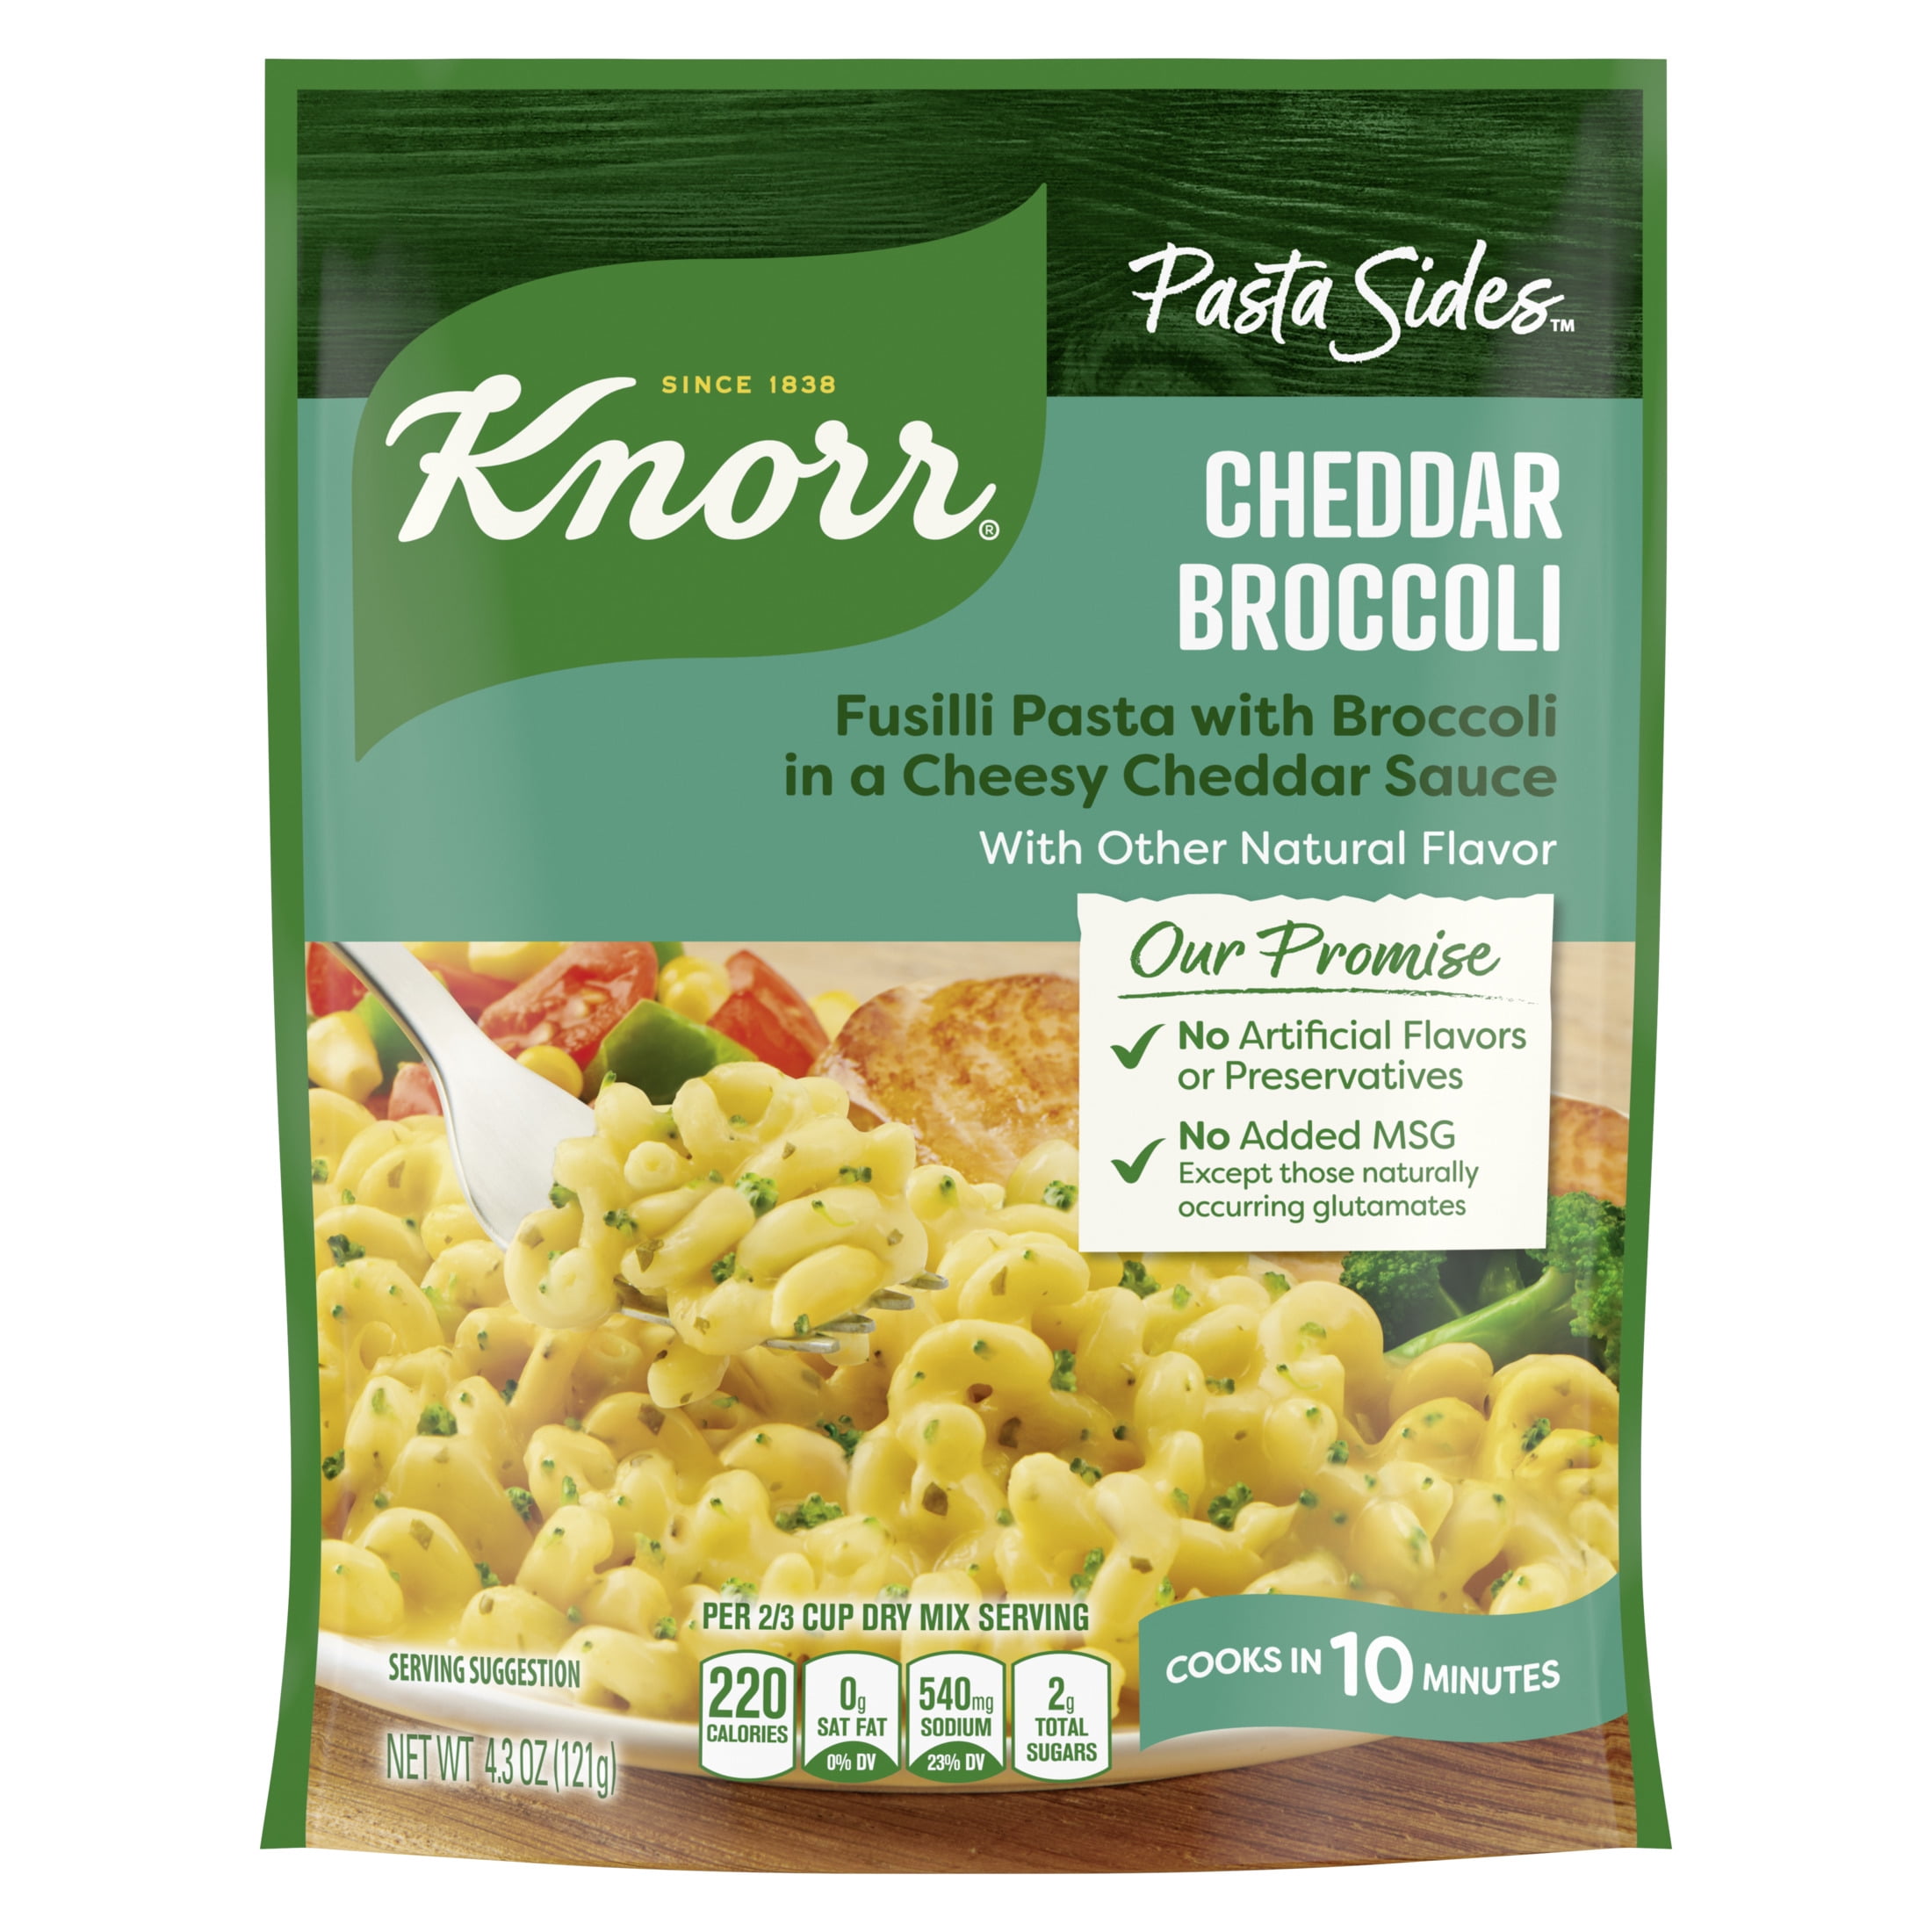 Knorr Pasta Sides Cheddar Broccoli Fusilli, Cooks in 10 Minutes, No Artificial Flavors, No Preservatives, No Added MSG 4.3 oz